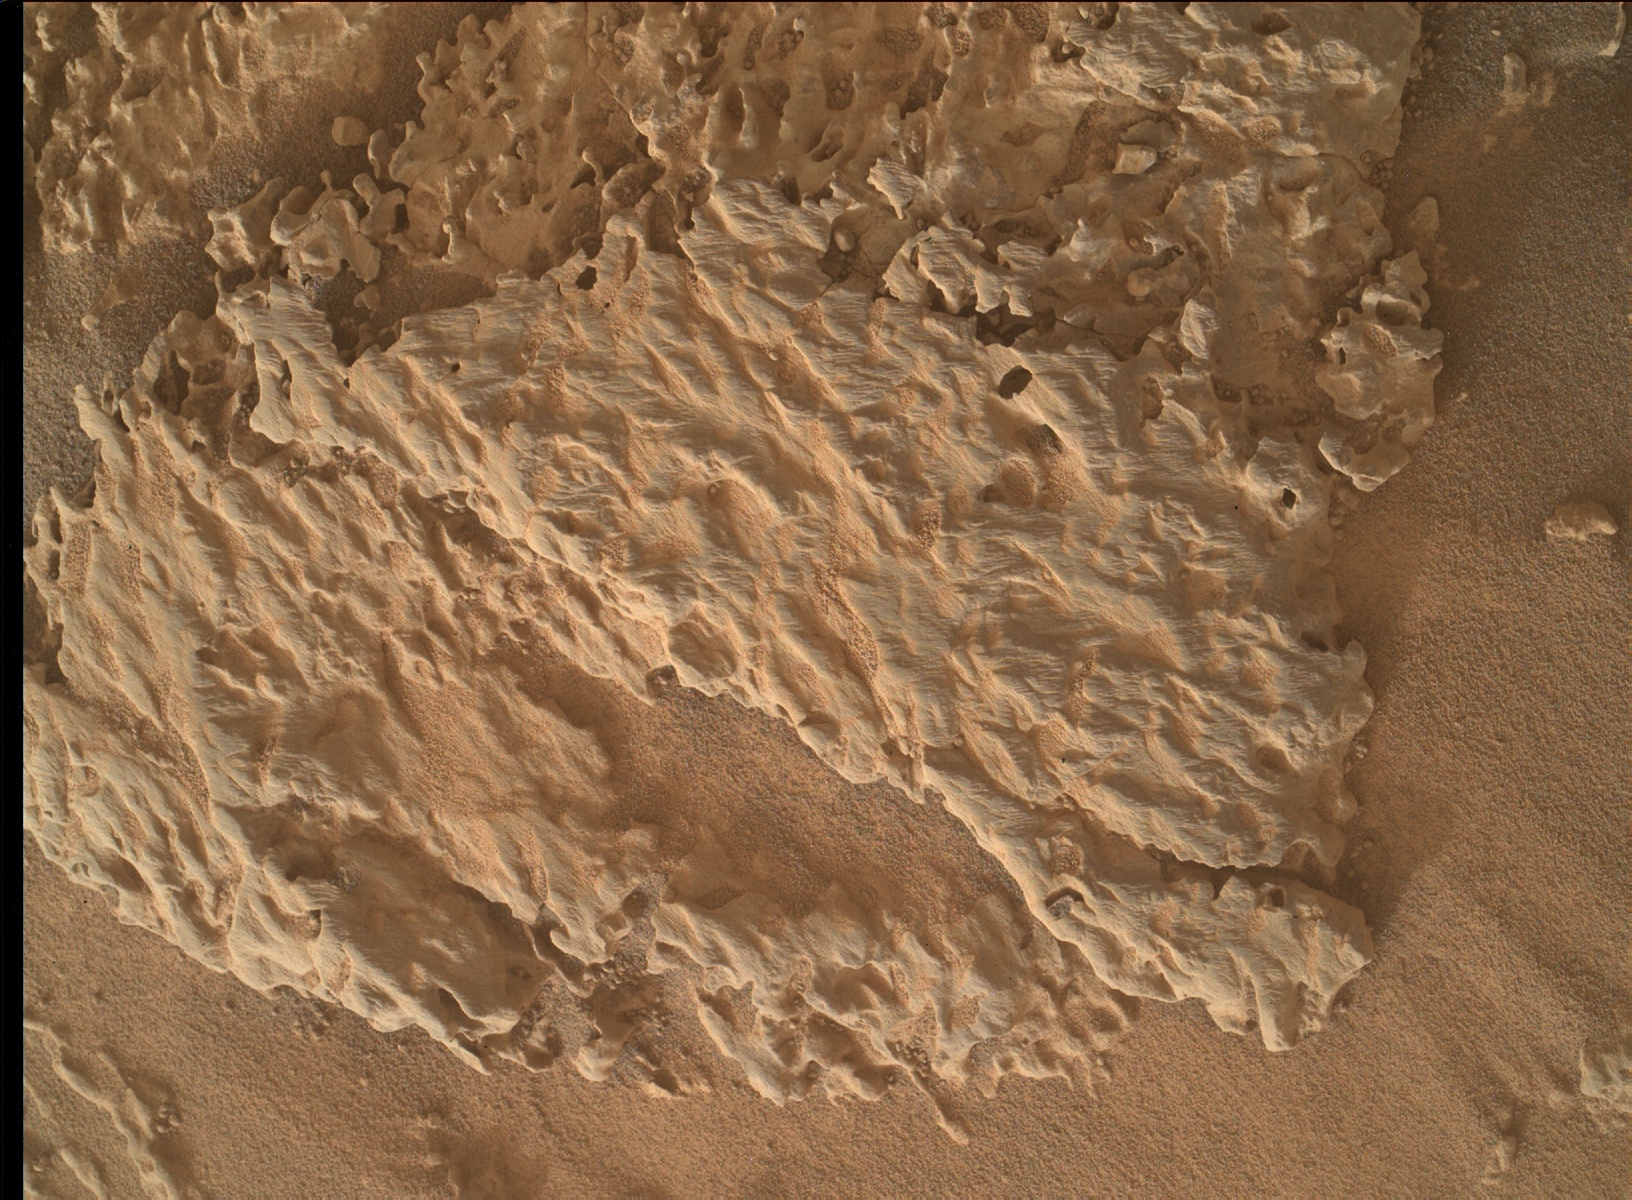 Pale orange terrain on the surface of Mars, with a sandy area creating a reverse "L" shape anchored in the lower right corner of the frame and extending to the upper right and lower left corners. The rest of the frame is covered in uneven, rocky ground of the same color that resembles meringue or whipped, peaked frosting spread on a cake.